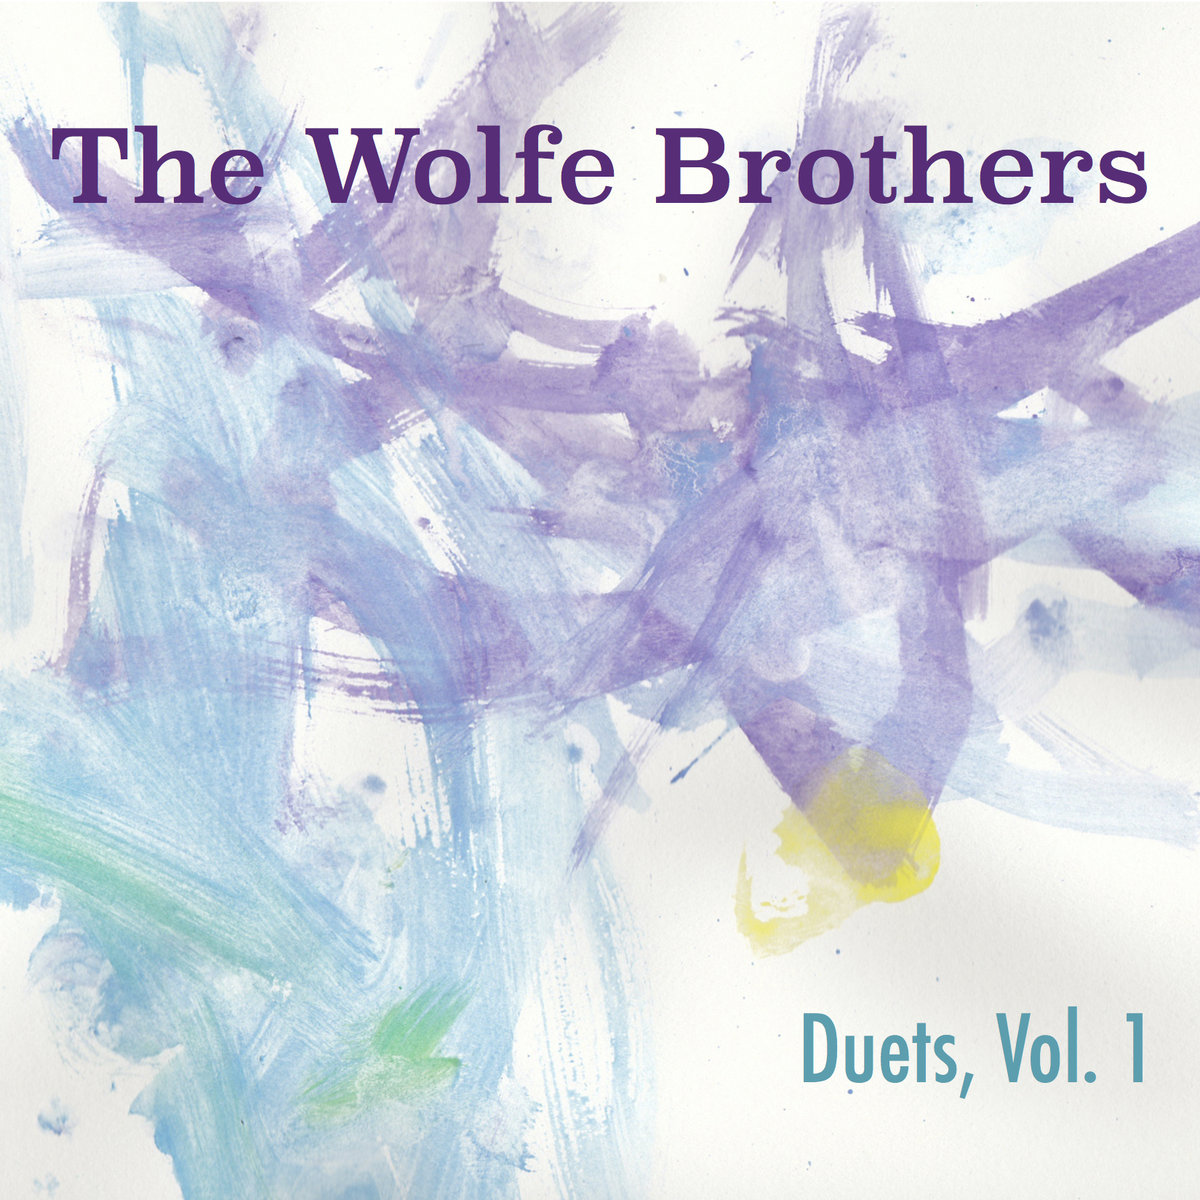 The Wolfe Brothers - Duets, Vol. 1 (2018)